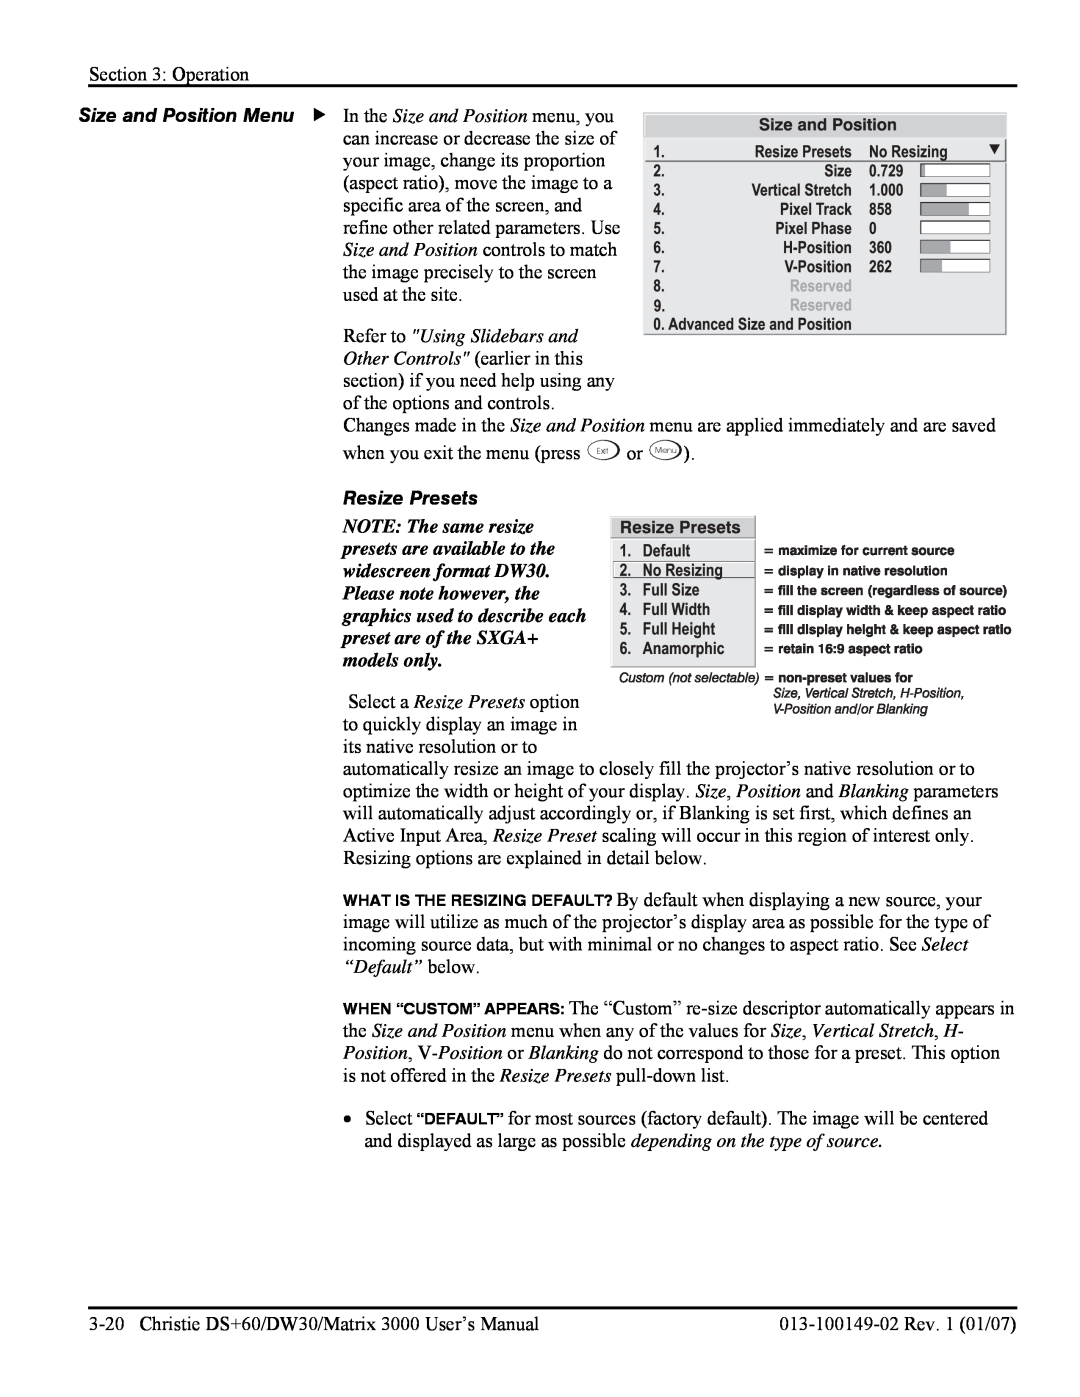 Texas Instruments DW30, MATRIX 3000 user manual Refer to Using Slidebars and Other Controls earlier in this, Resize Presets 